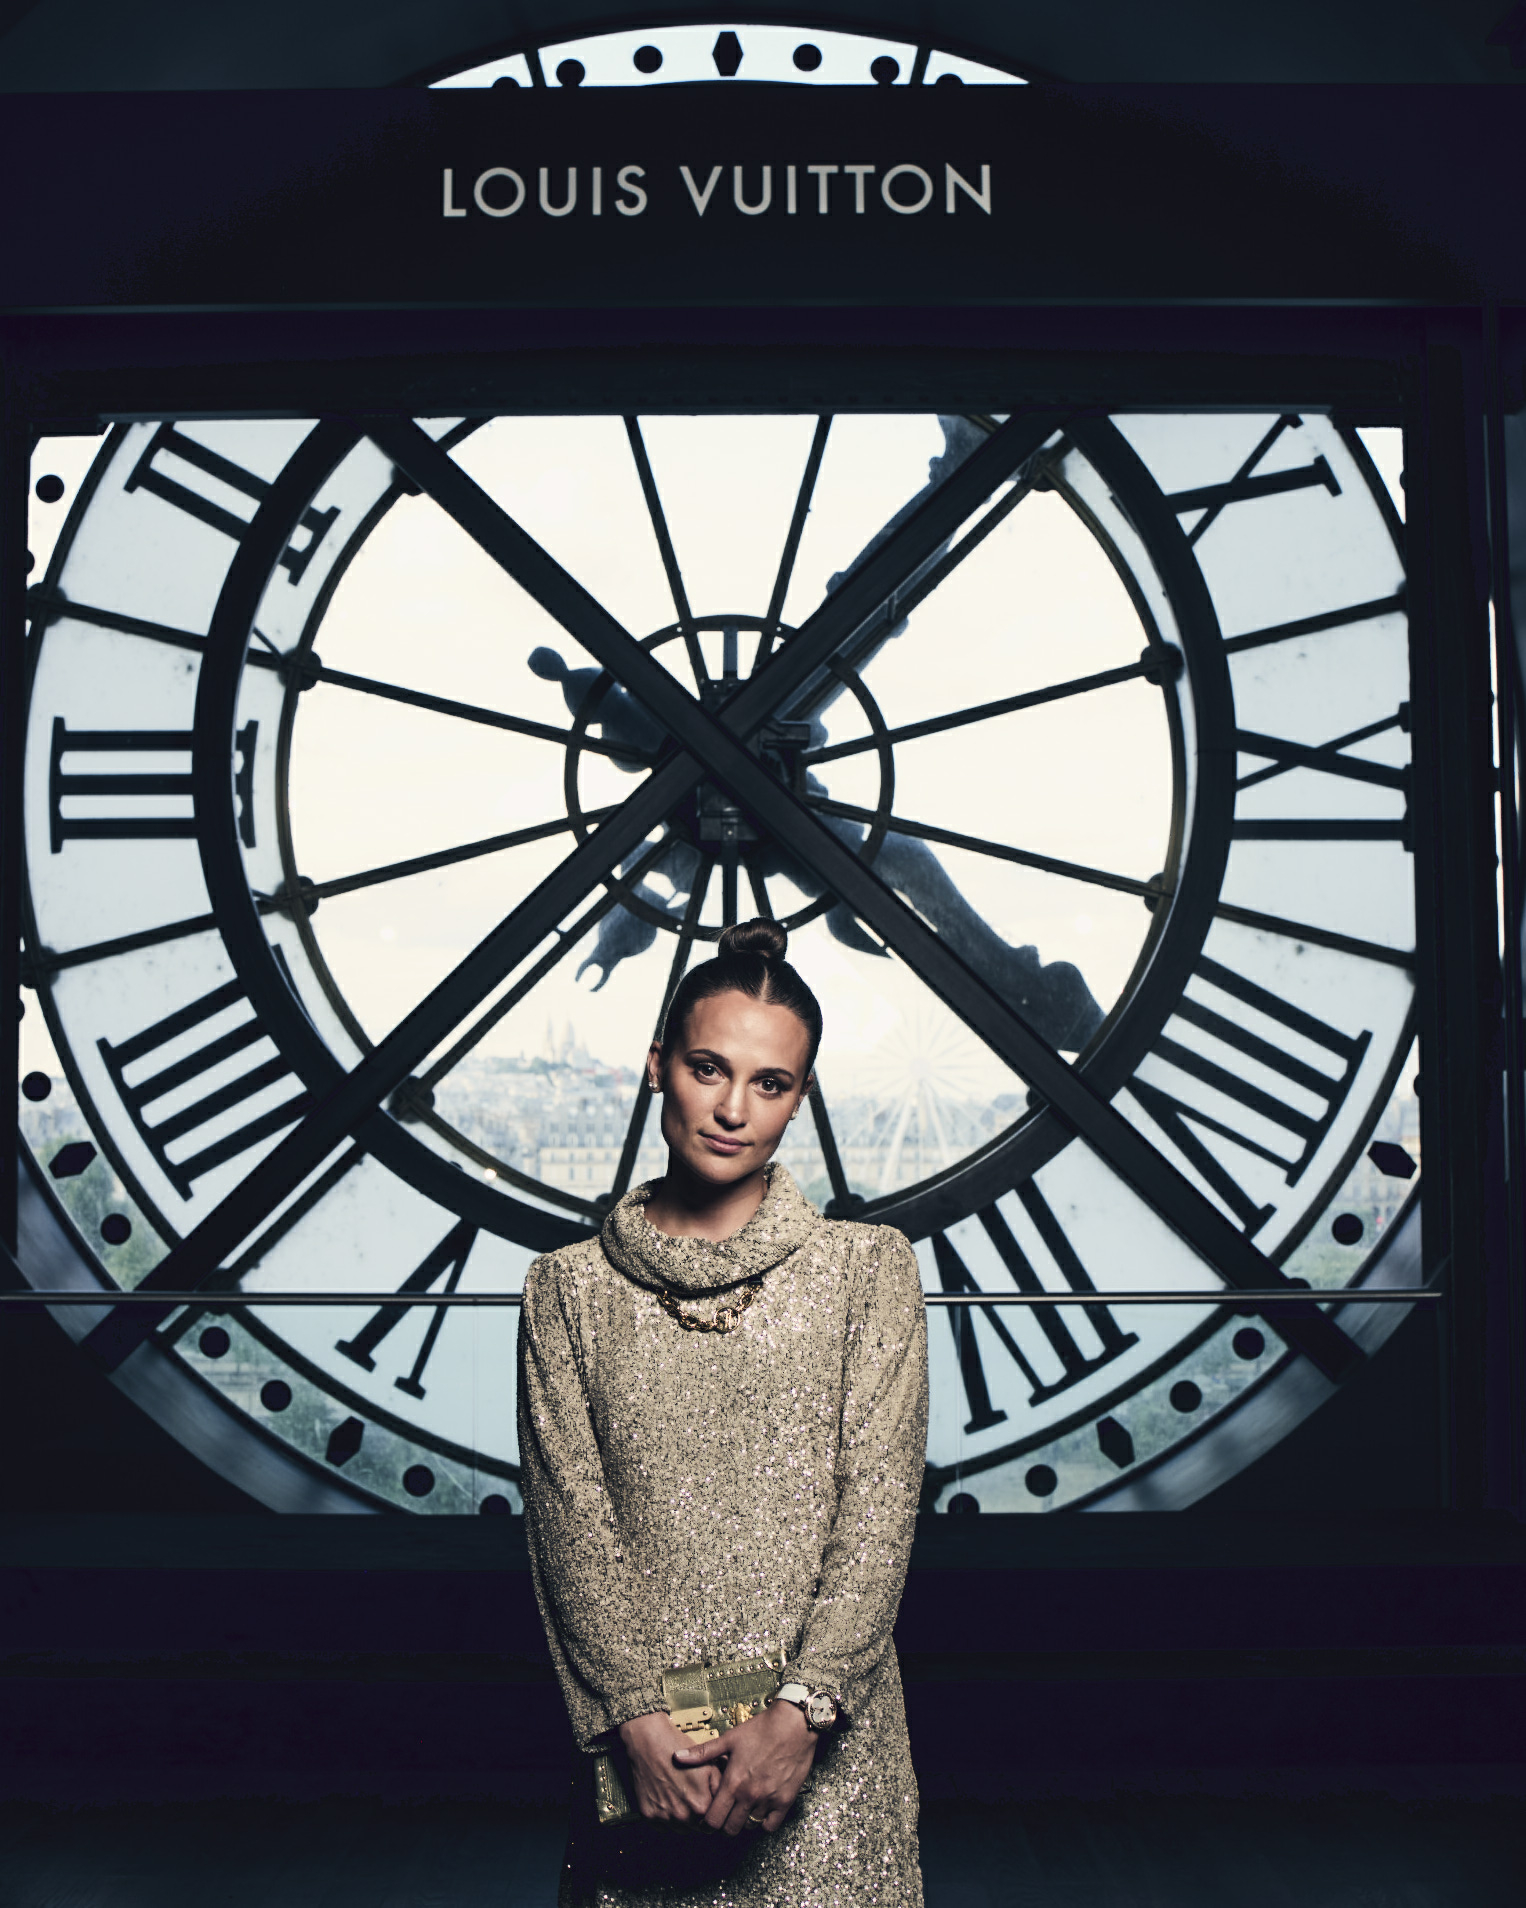 Louis Vuitton Tambour - New Mags